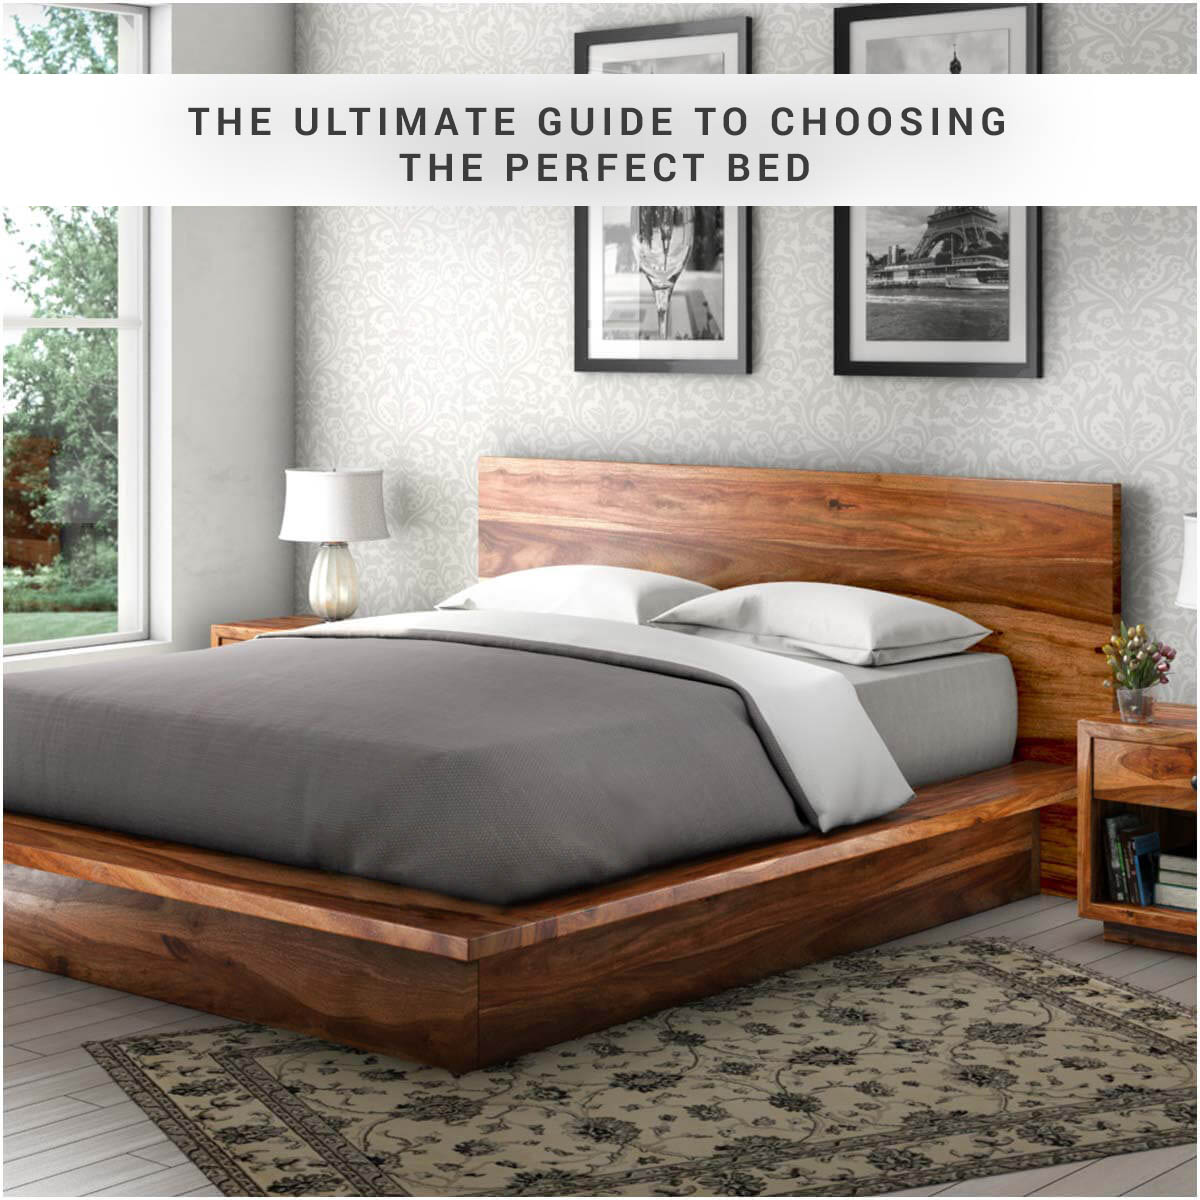 Expert Buying Guide for Platform Bed Frames: Find the Perfect Frame for Your Dream Bedroom!